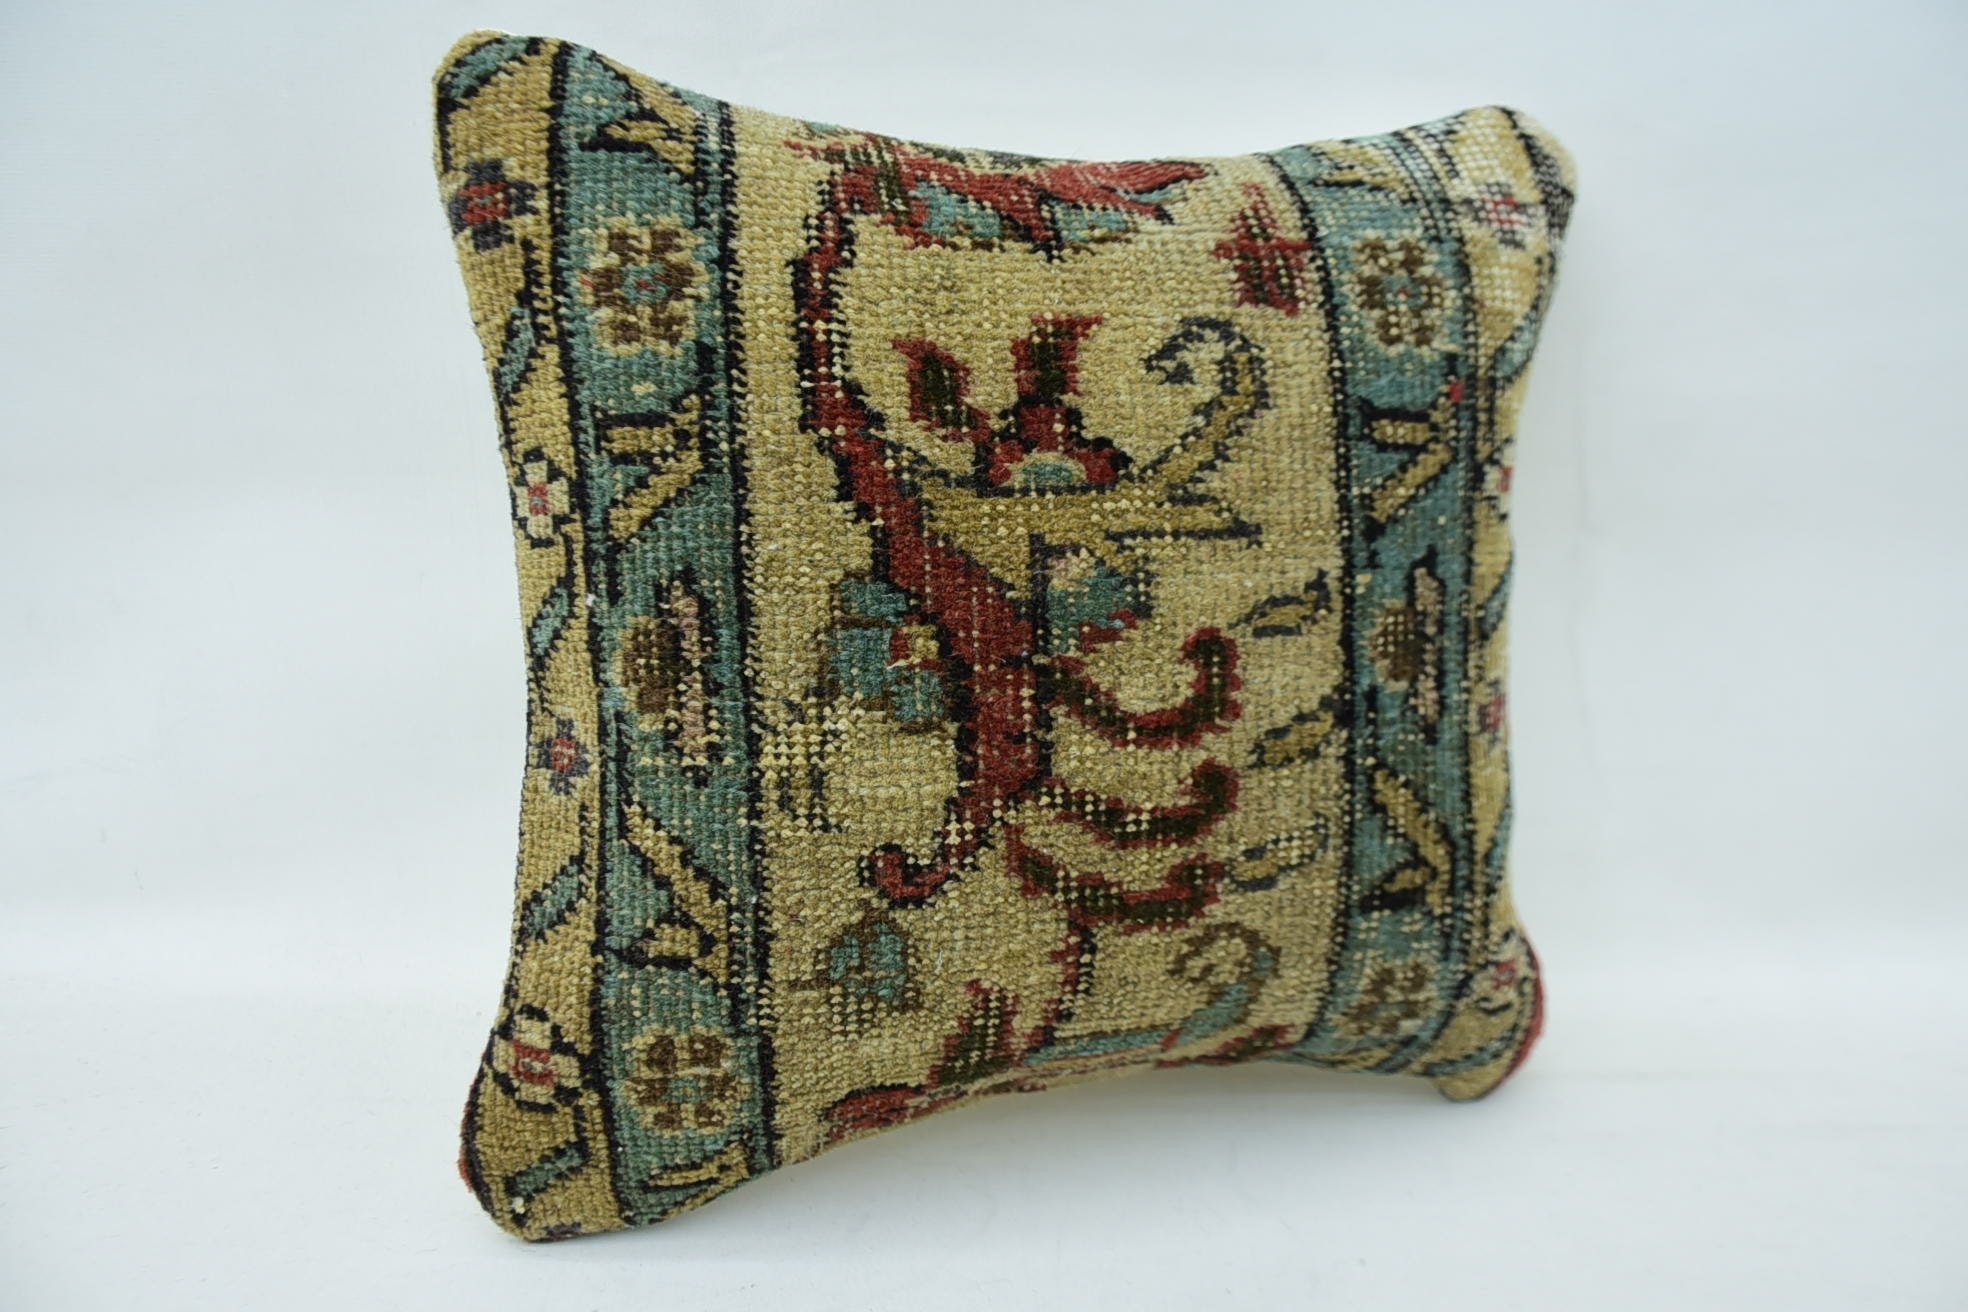 Vintage Kilim Throw Pillow, One Of A Kind Cushion, Pillow for Couch, Boho Pillow Sham Cover, 14"x14" Beige Pillow Case